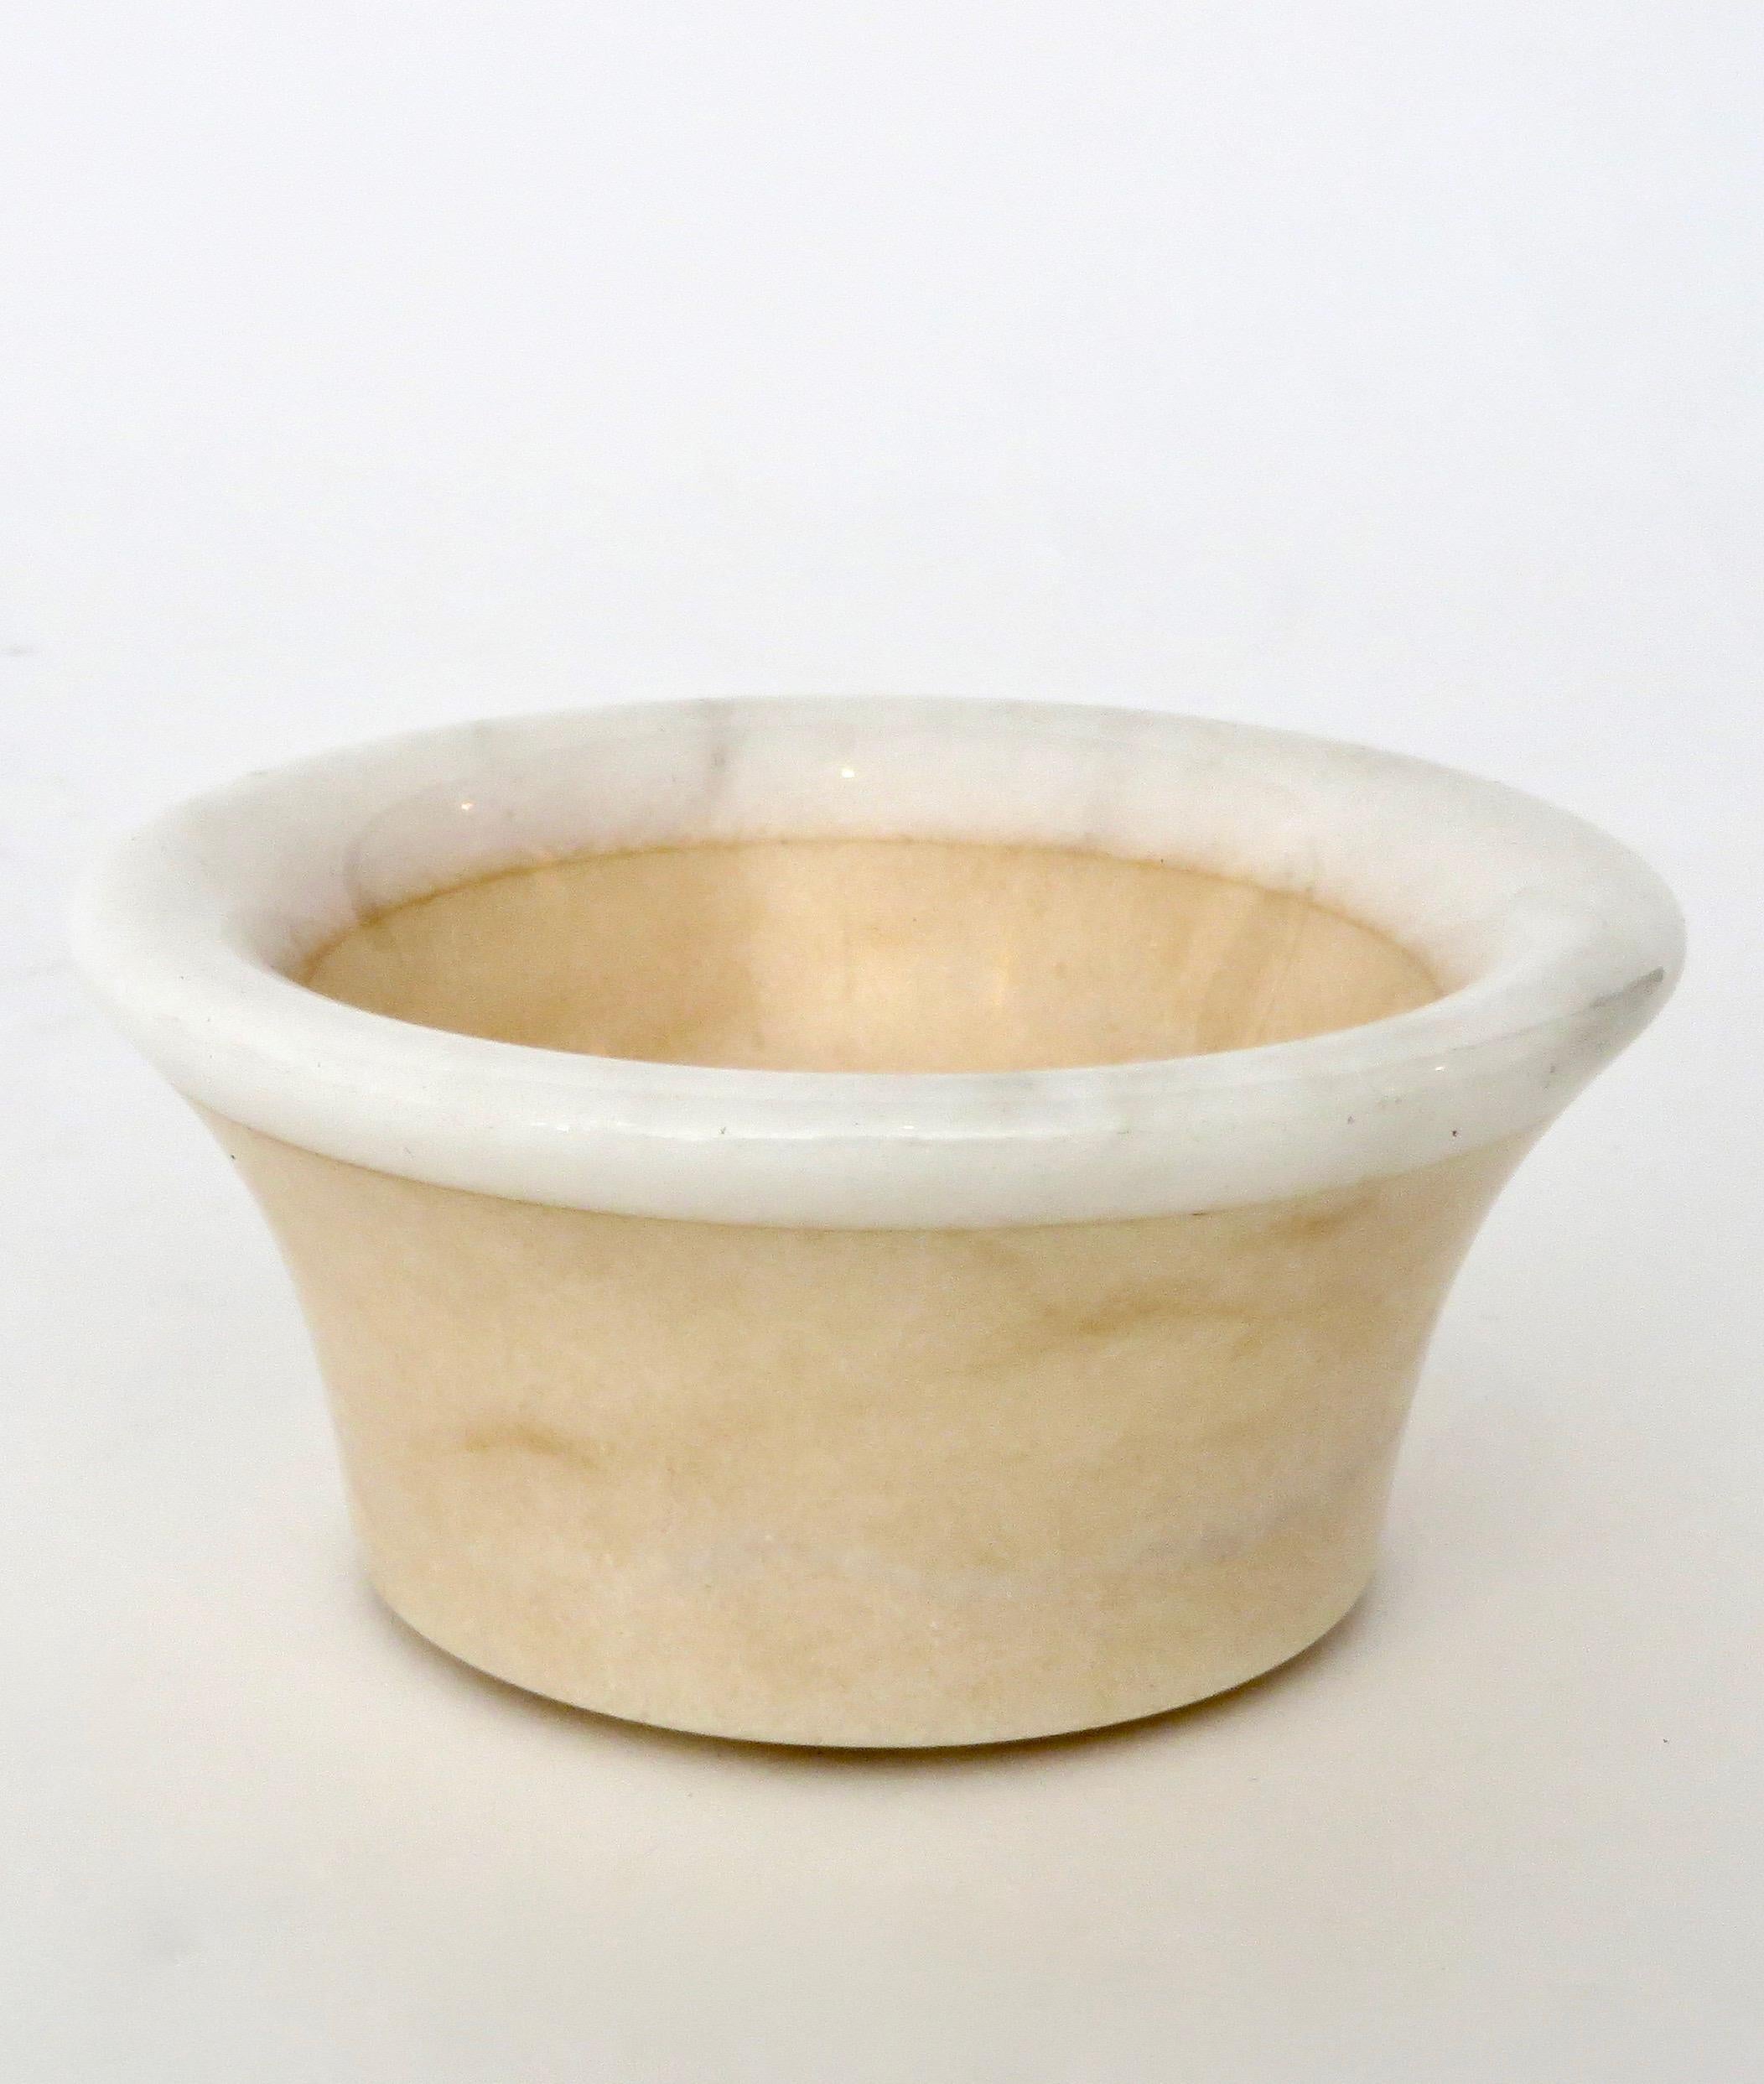 A cream polished marble bowl or dish or vide poche for the dresser, desk or any other use. 
This bowl has a lighter creamy white polished edge.